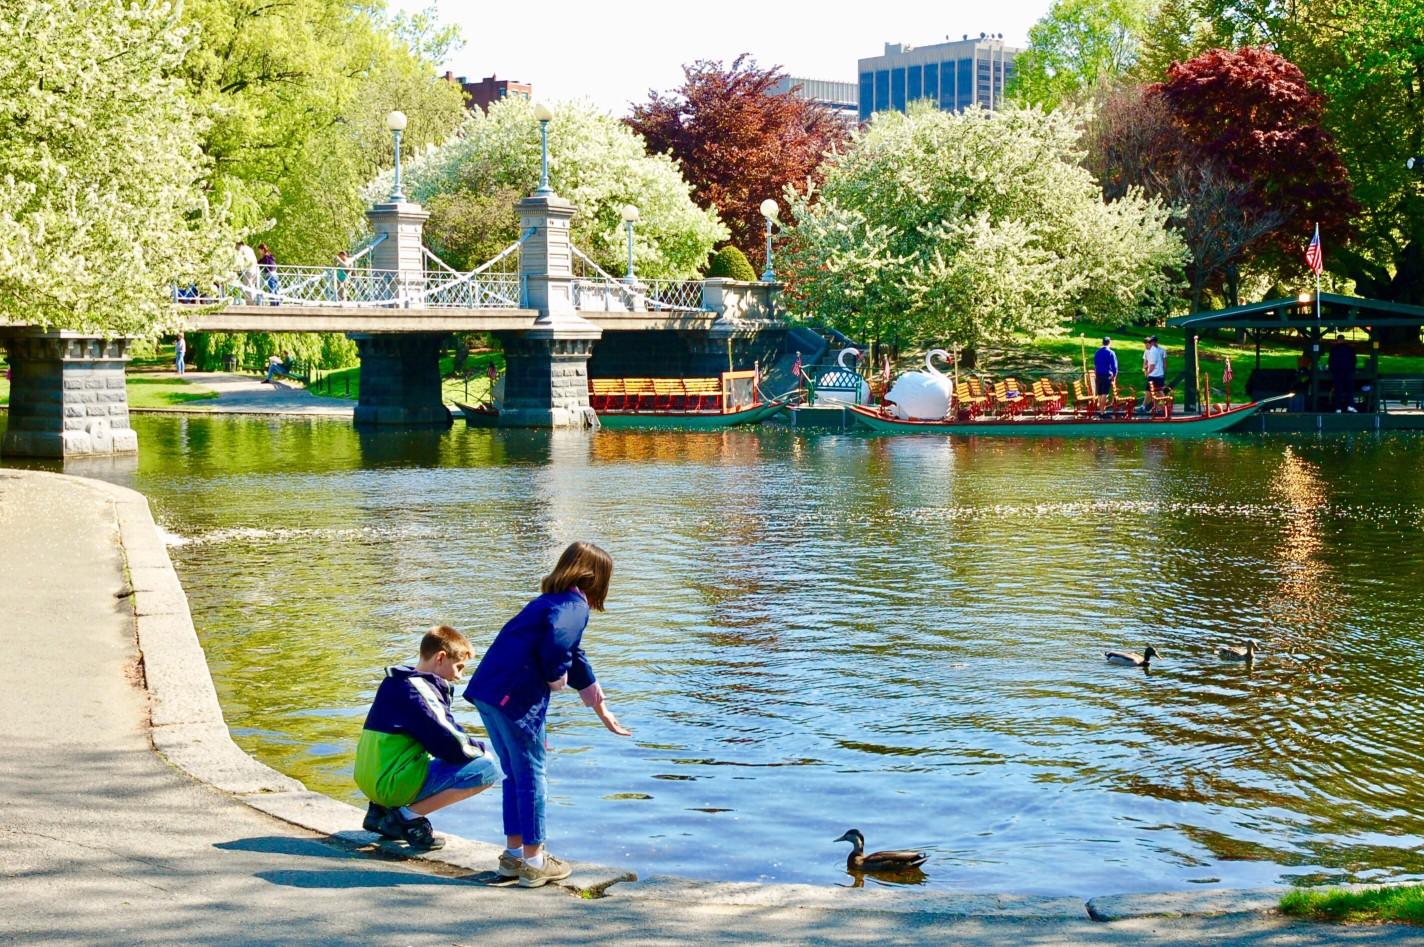 Swan boats on the Boston Common